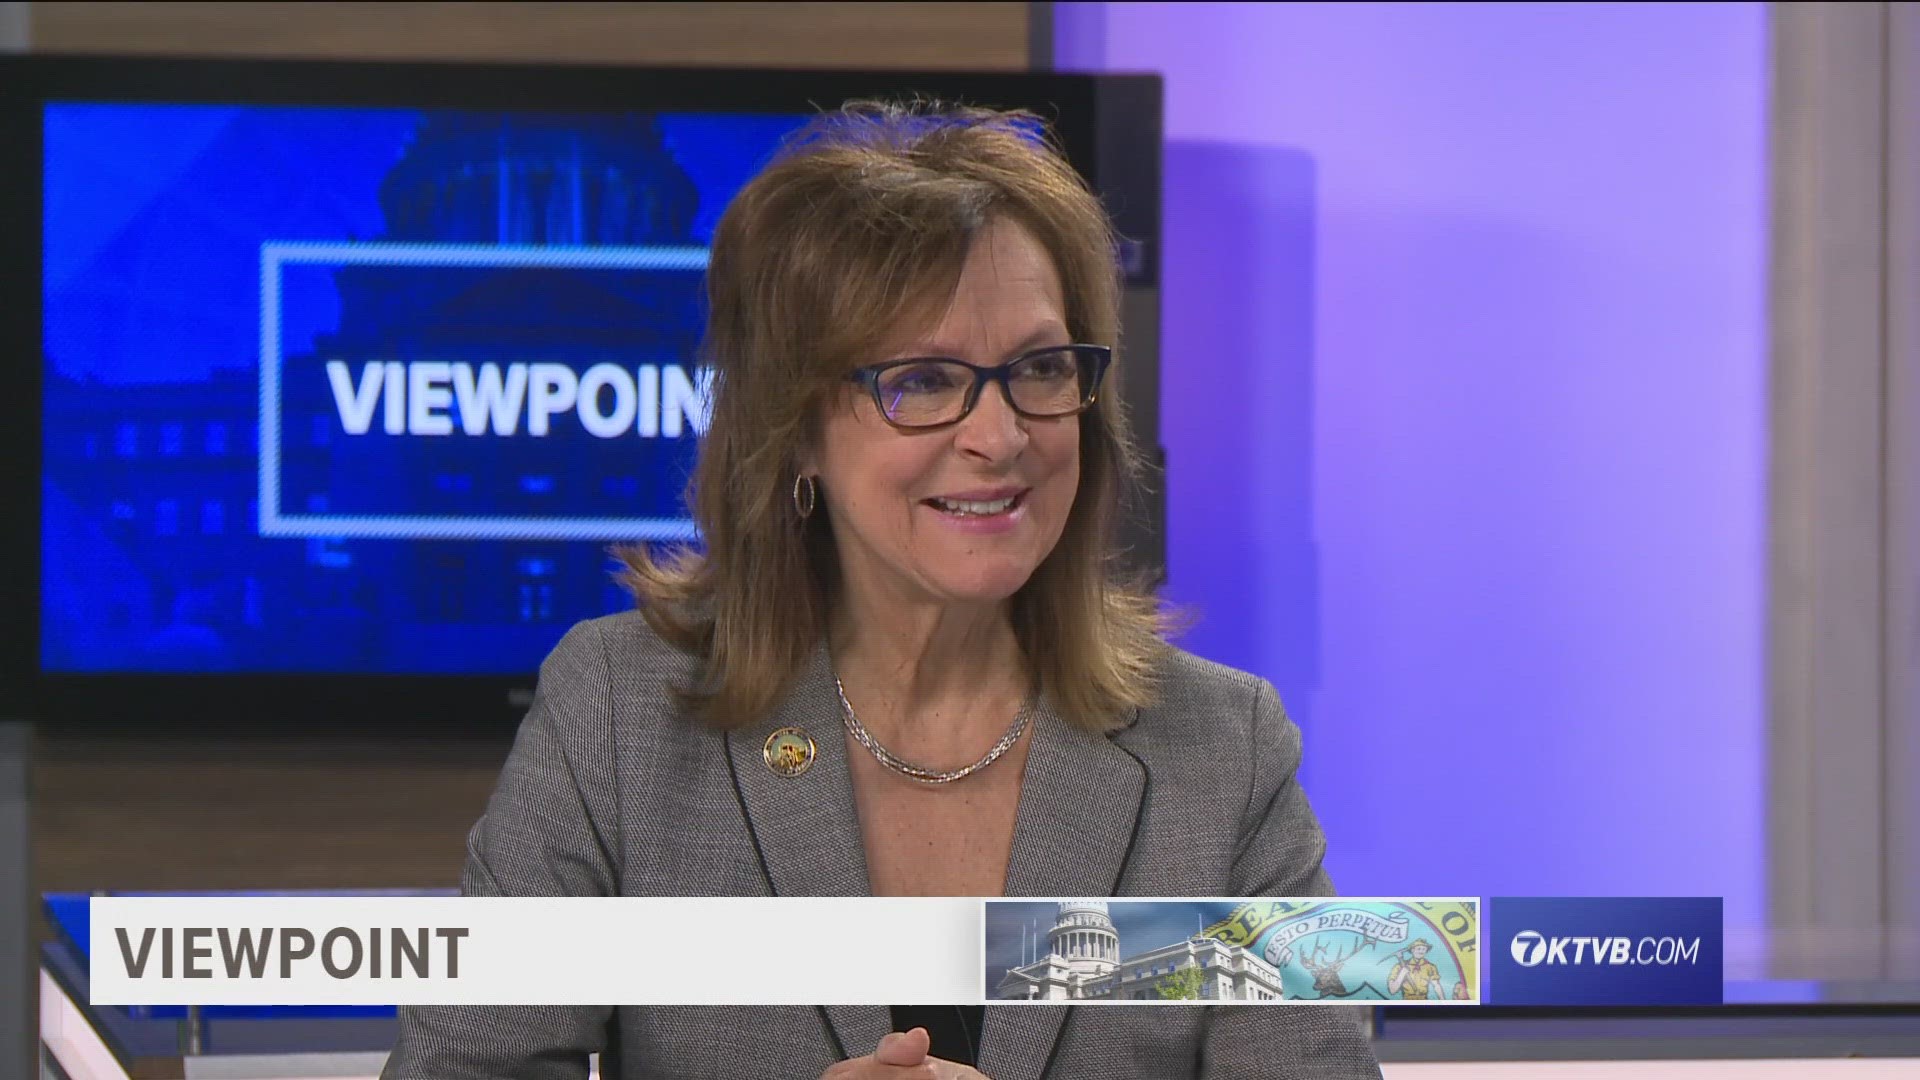 From North to south, east to west, the state of Idaho continues to see major growth. Nampa Mayor Debbie Kling discusses growth and looking forward to the future.